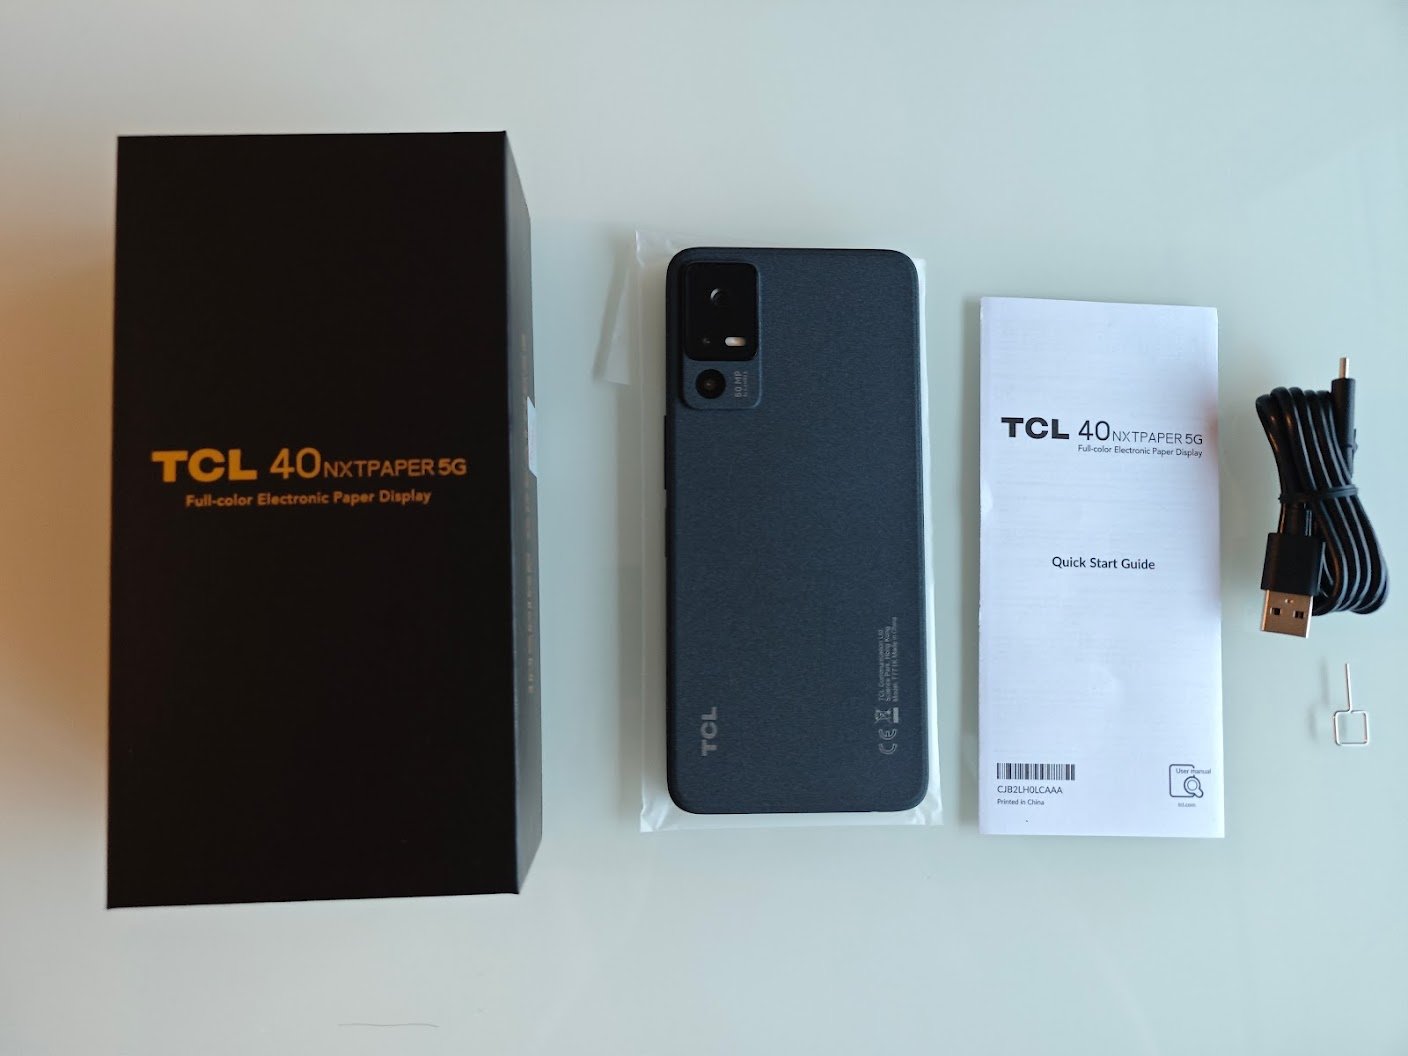 TCL 40 NXTPAPER 5G Review (Hardware) - Official GBAtemp Review